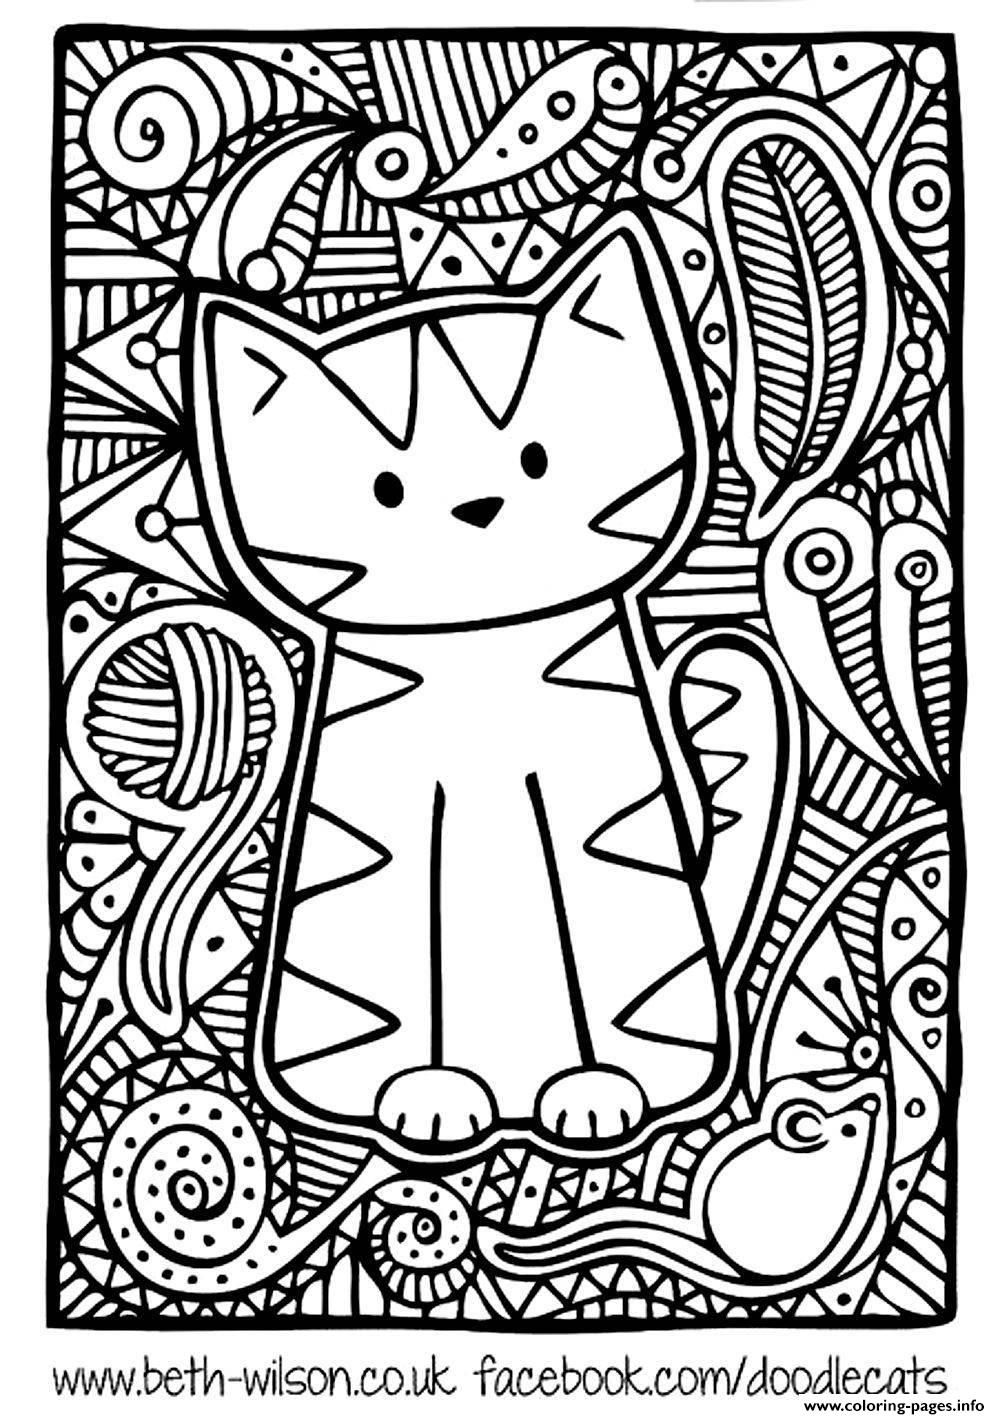 Print adult difficult cute cat Coloring pages